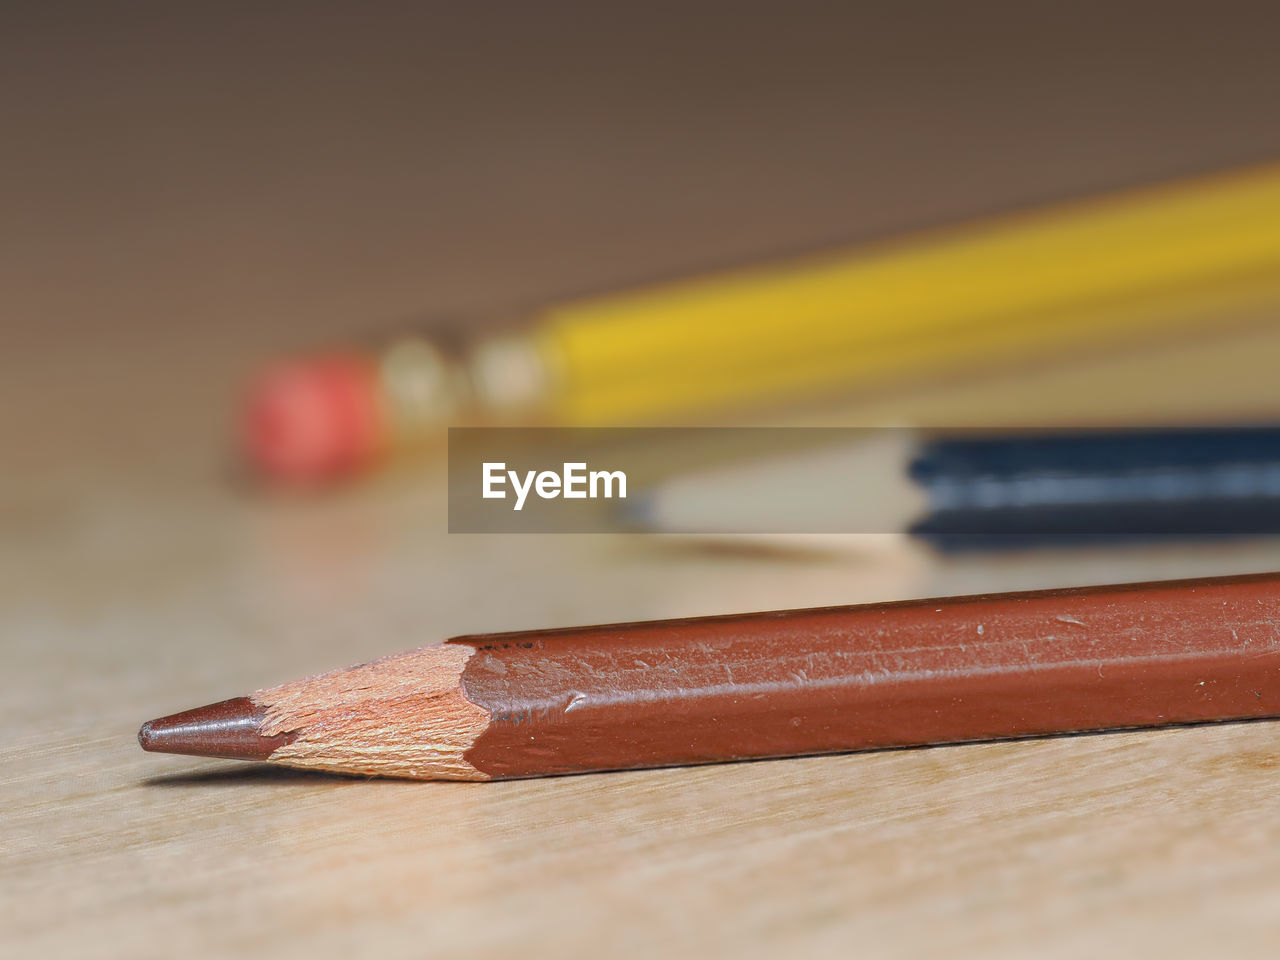 pencil, wood, close-up, writing instrument, no people, education, indoors, sharp, selective focus, colored pencil, still life, rubber, table, eraser, learning, writing, craft, studio shot, red